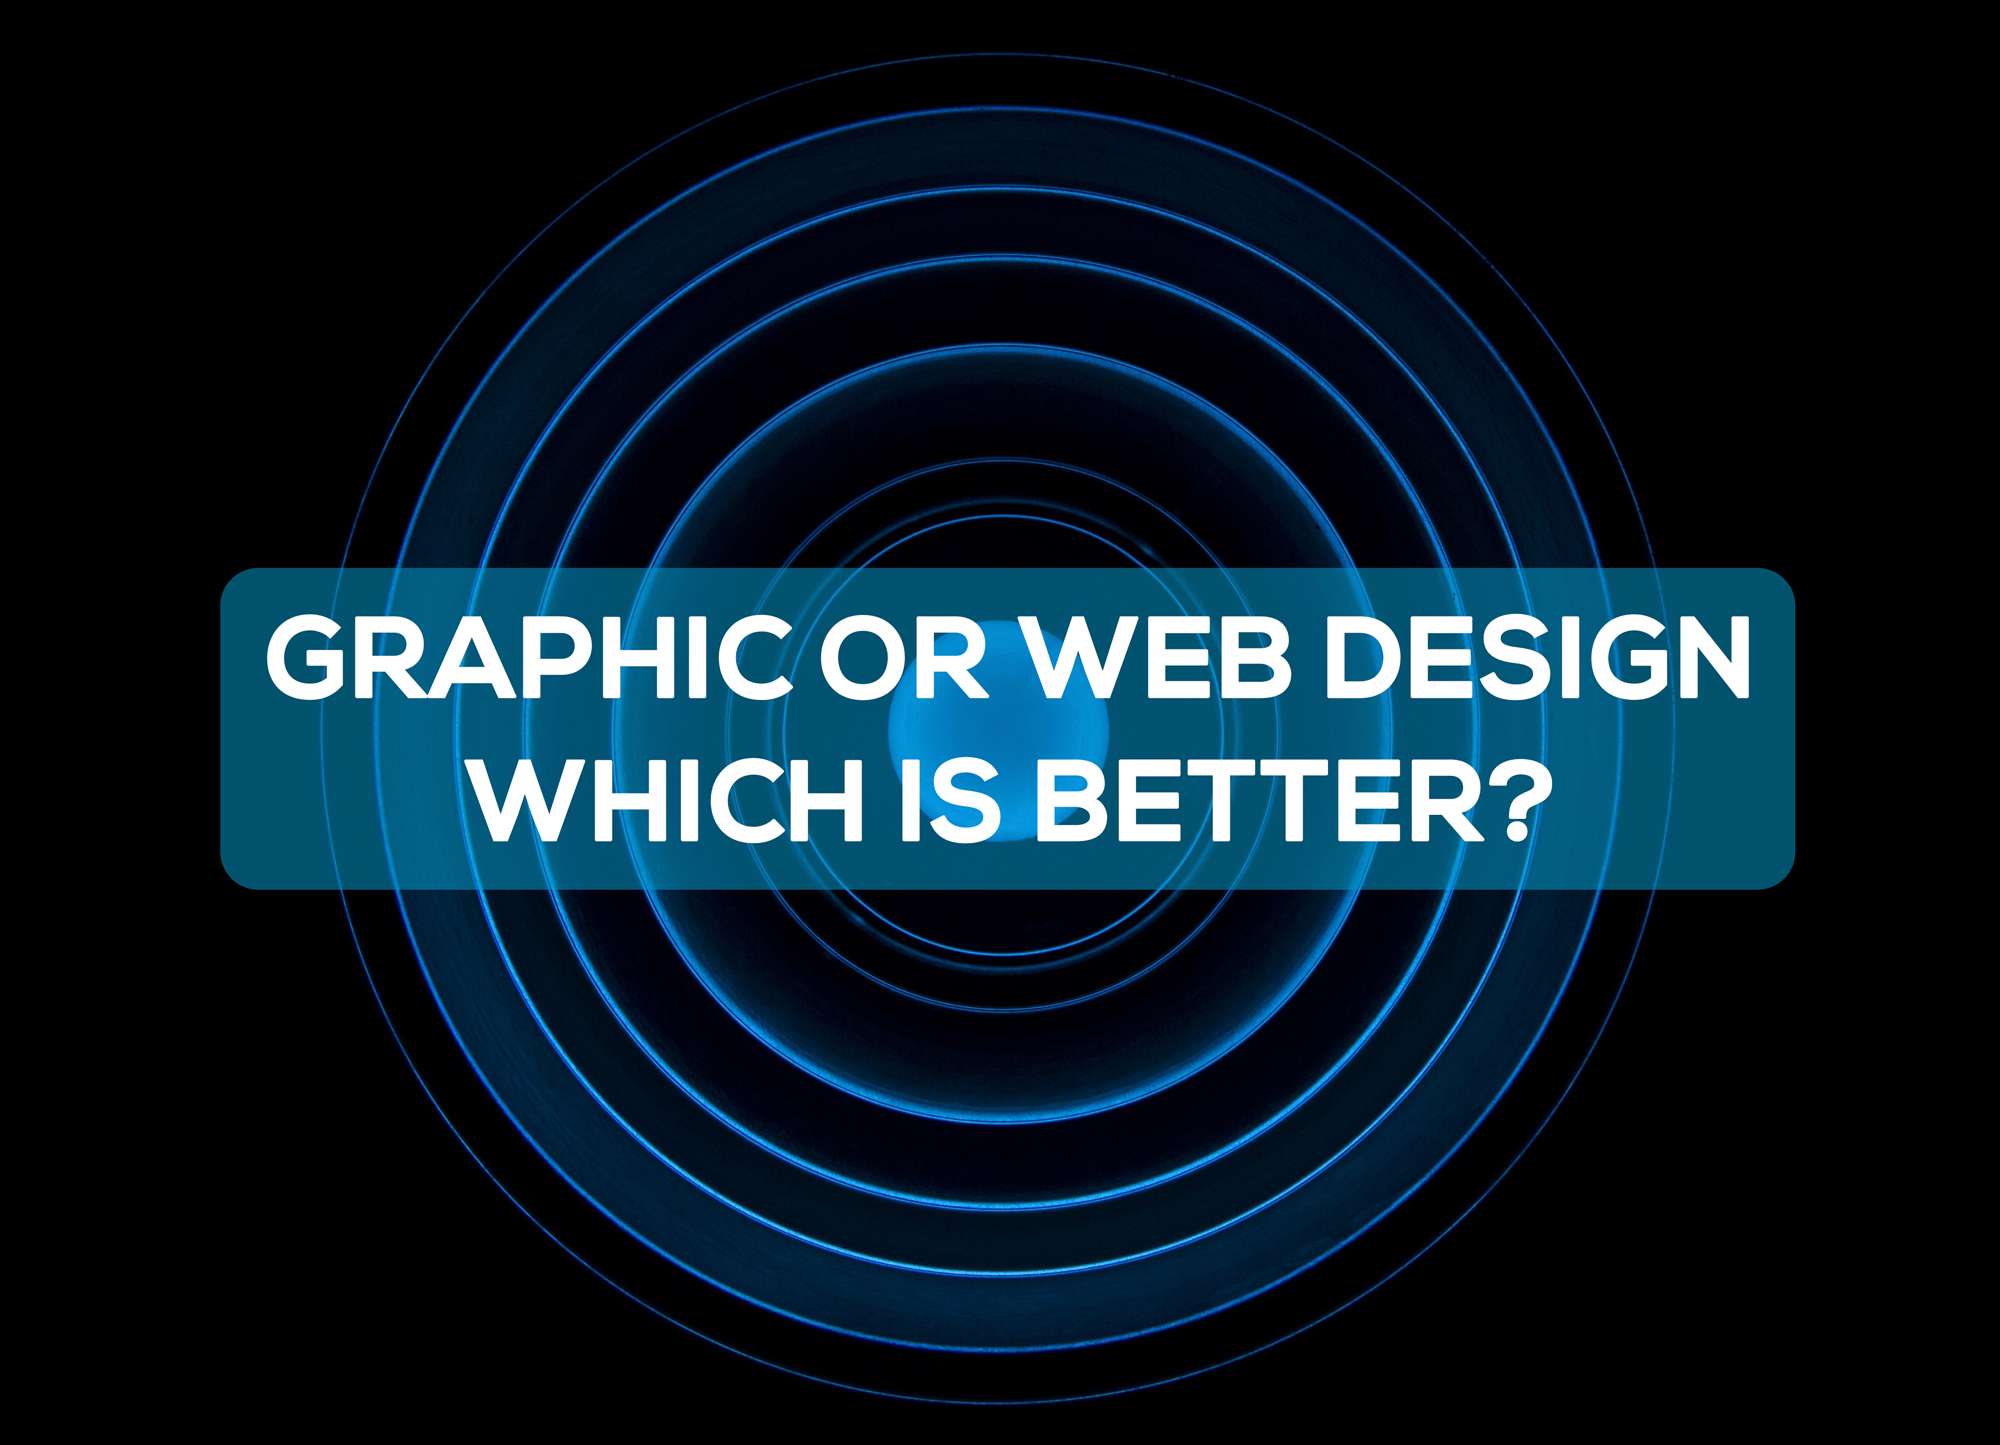 Graphic or web design, which is better?